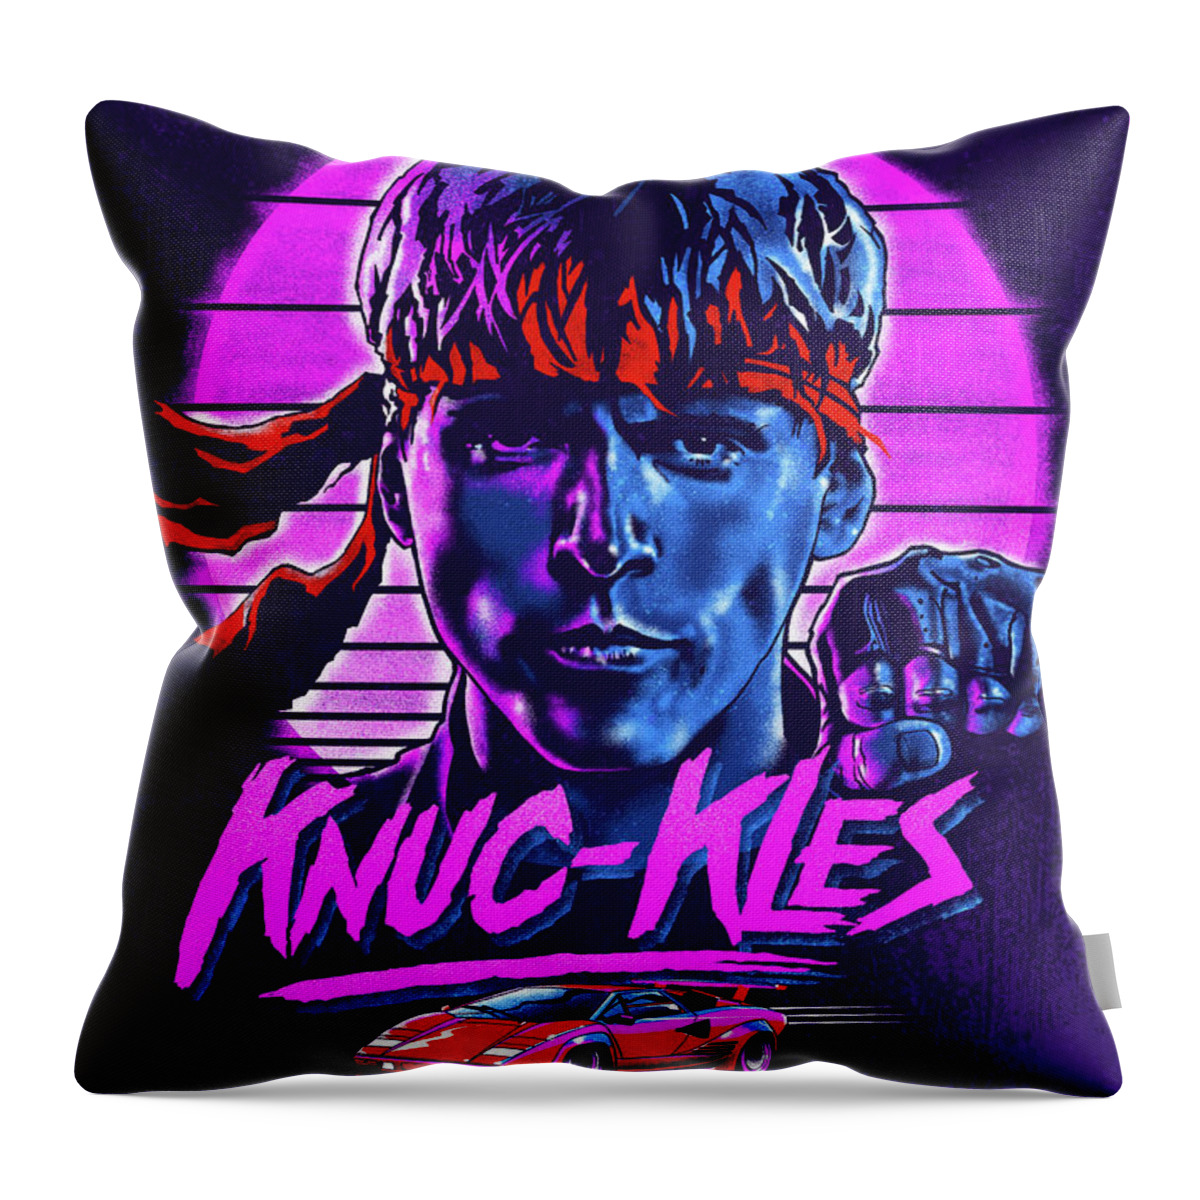 Kungfury Throw Pillow featuring the digital art Knuc-kles by Zerobriant Designs